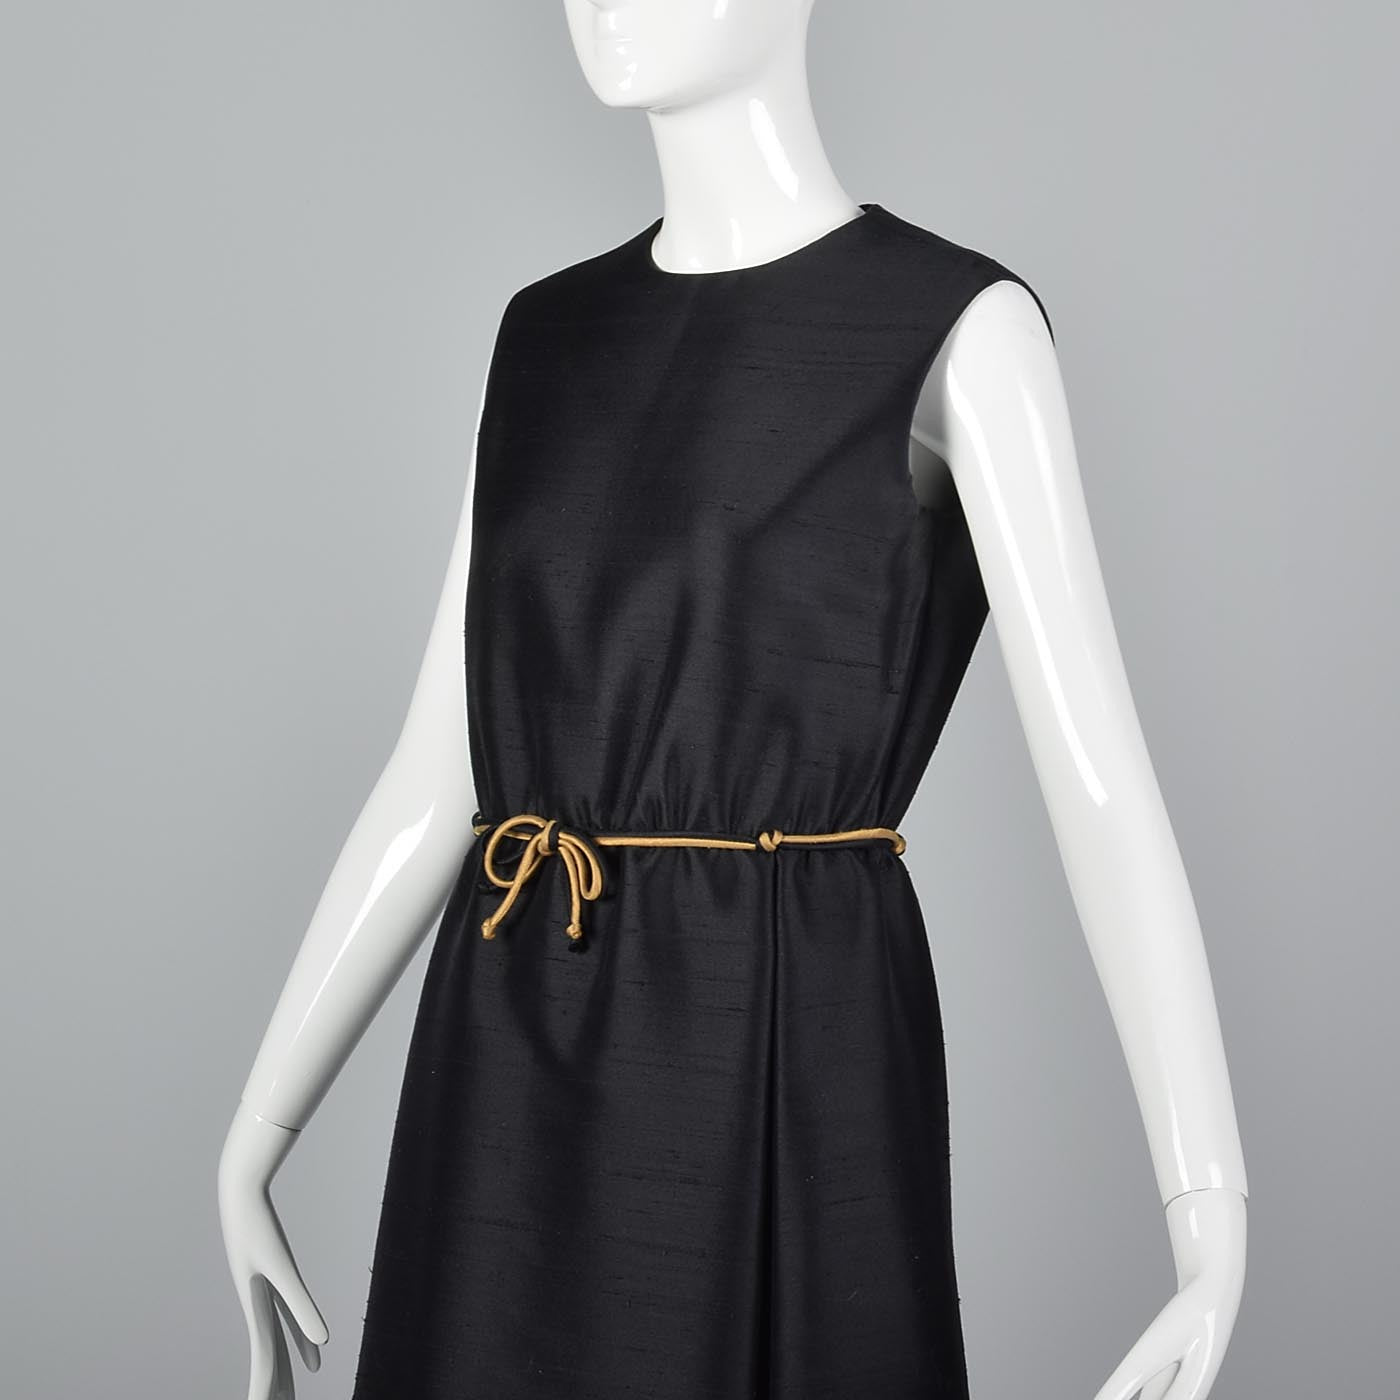 1960s Black Dress with Matching Gold Jacket